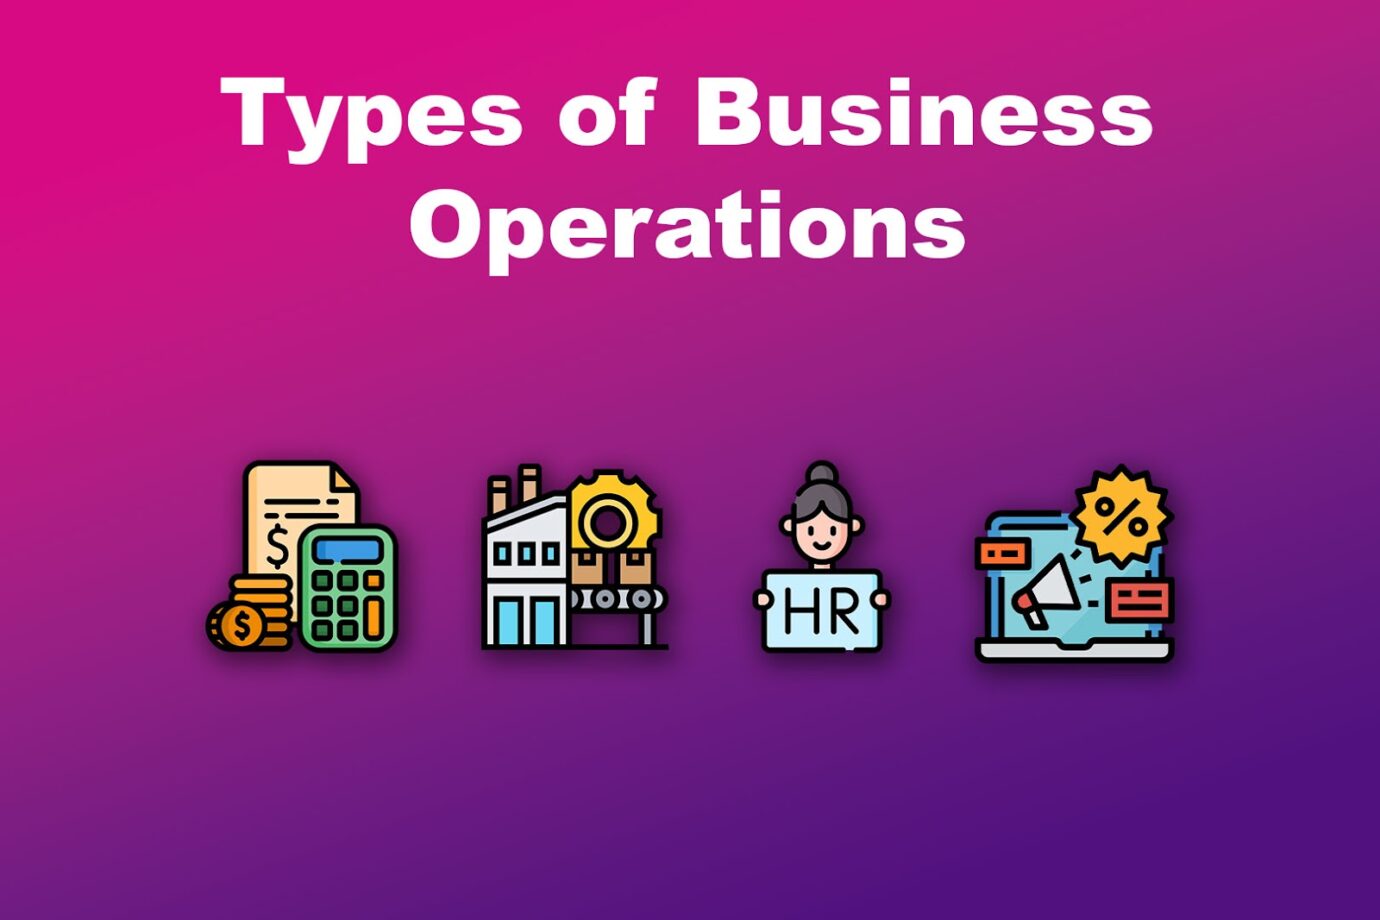 Types of Business Operations